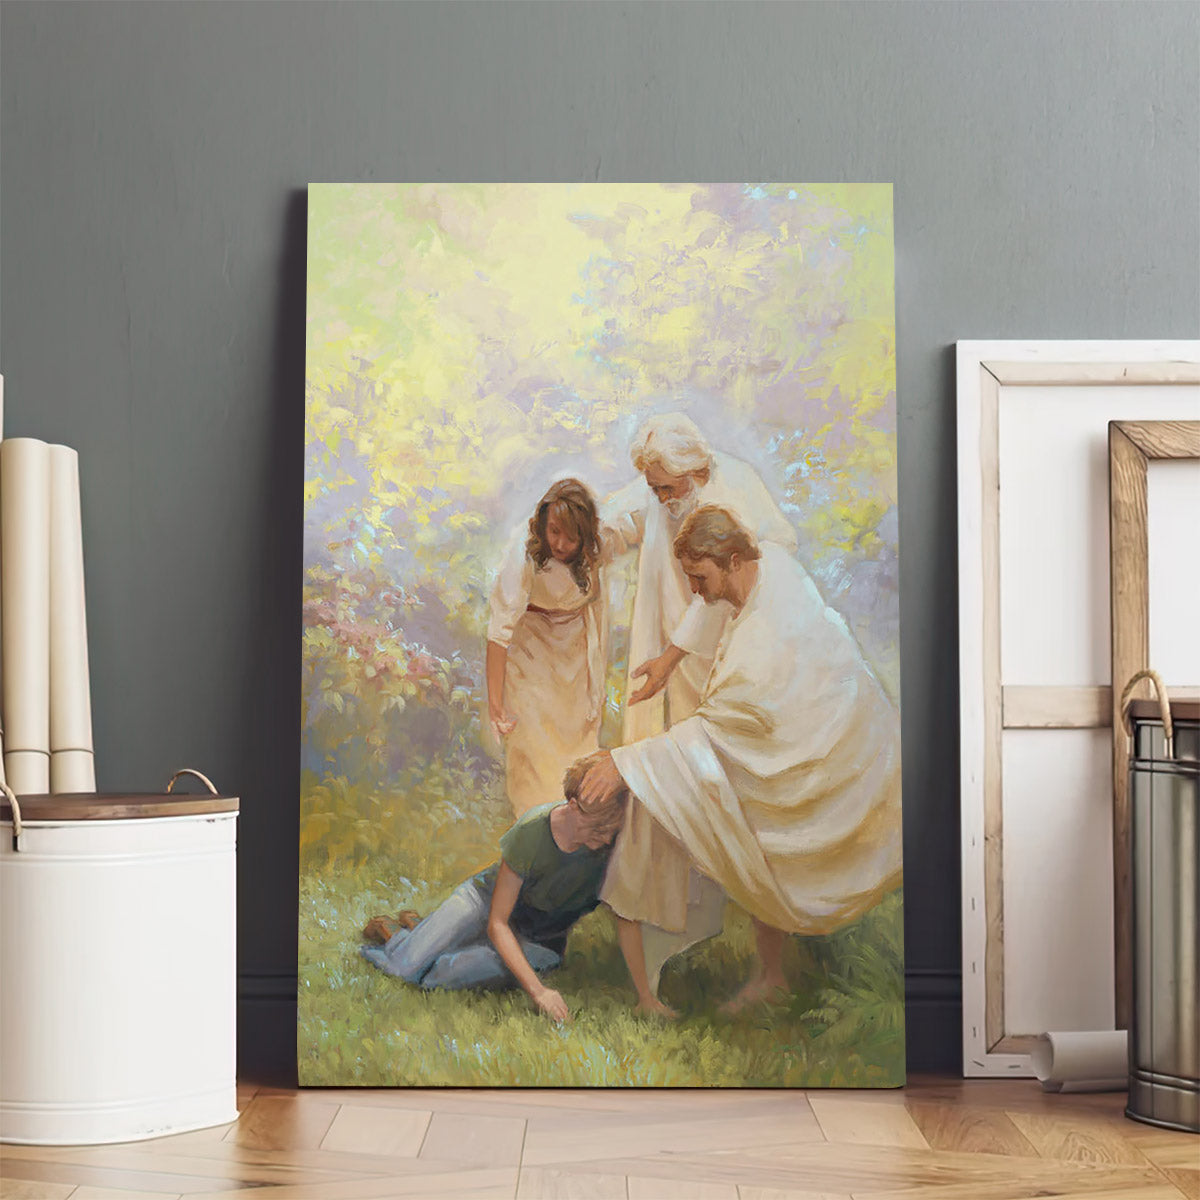 Ministering Canvas Picture - Jesus Canvas Wall Art - Christian Wall Art